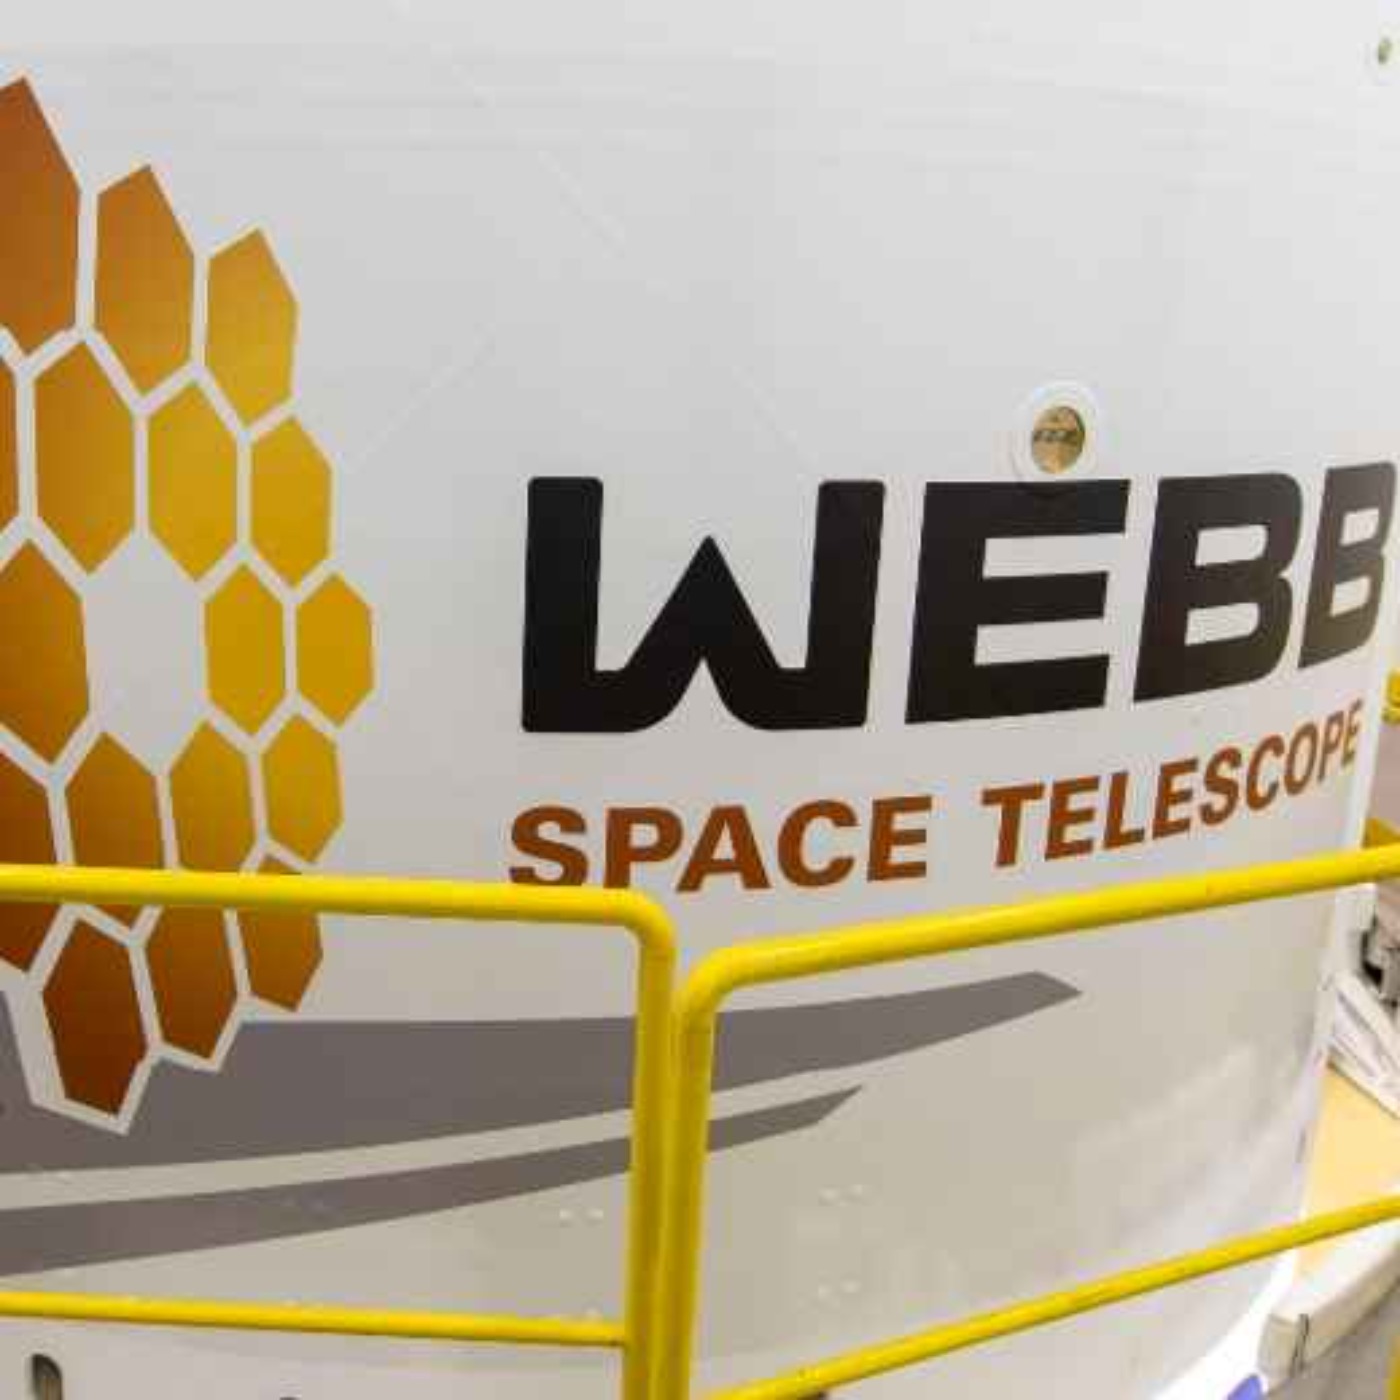 The History of the James Webb Space Telescope